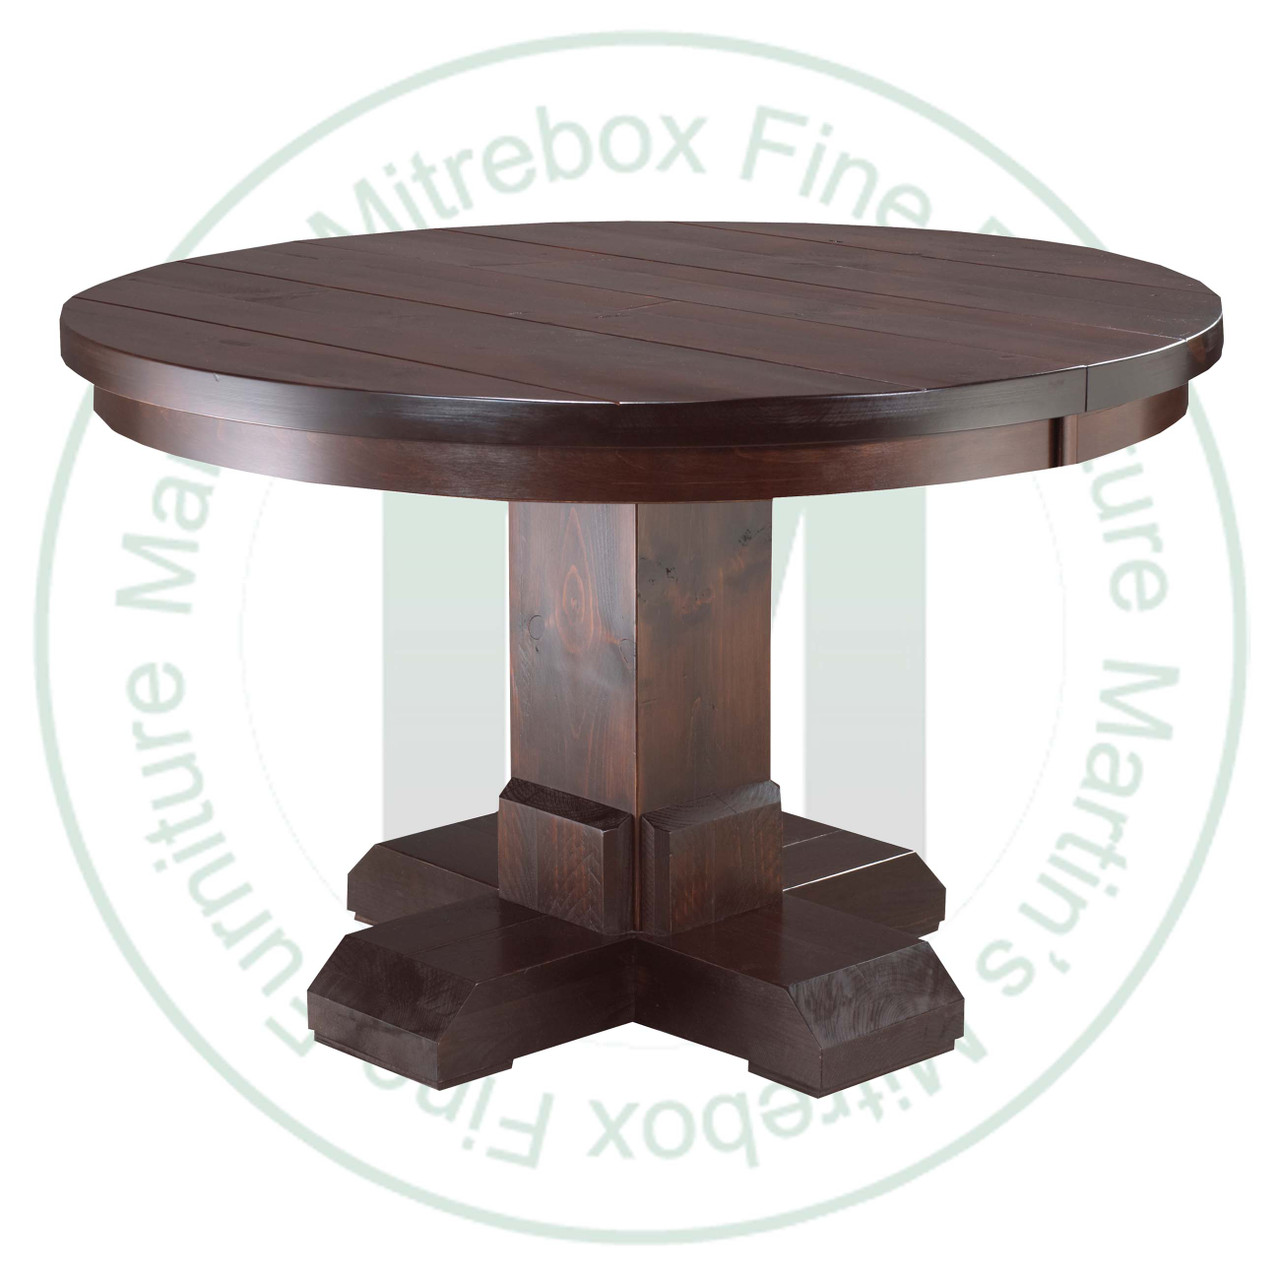 Wormy Maple Shrewsbury Single Pedestal Table 36''D x 36''W x 30''H Round Solid Table. Table Has 1.25'' Thick Top.